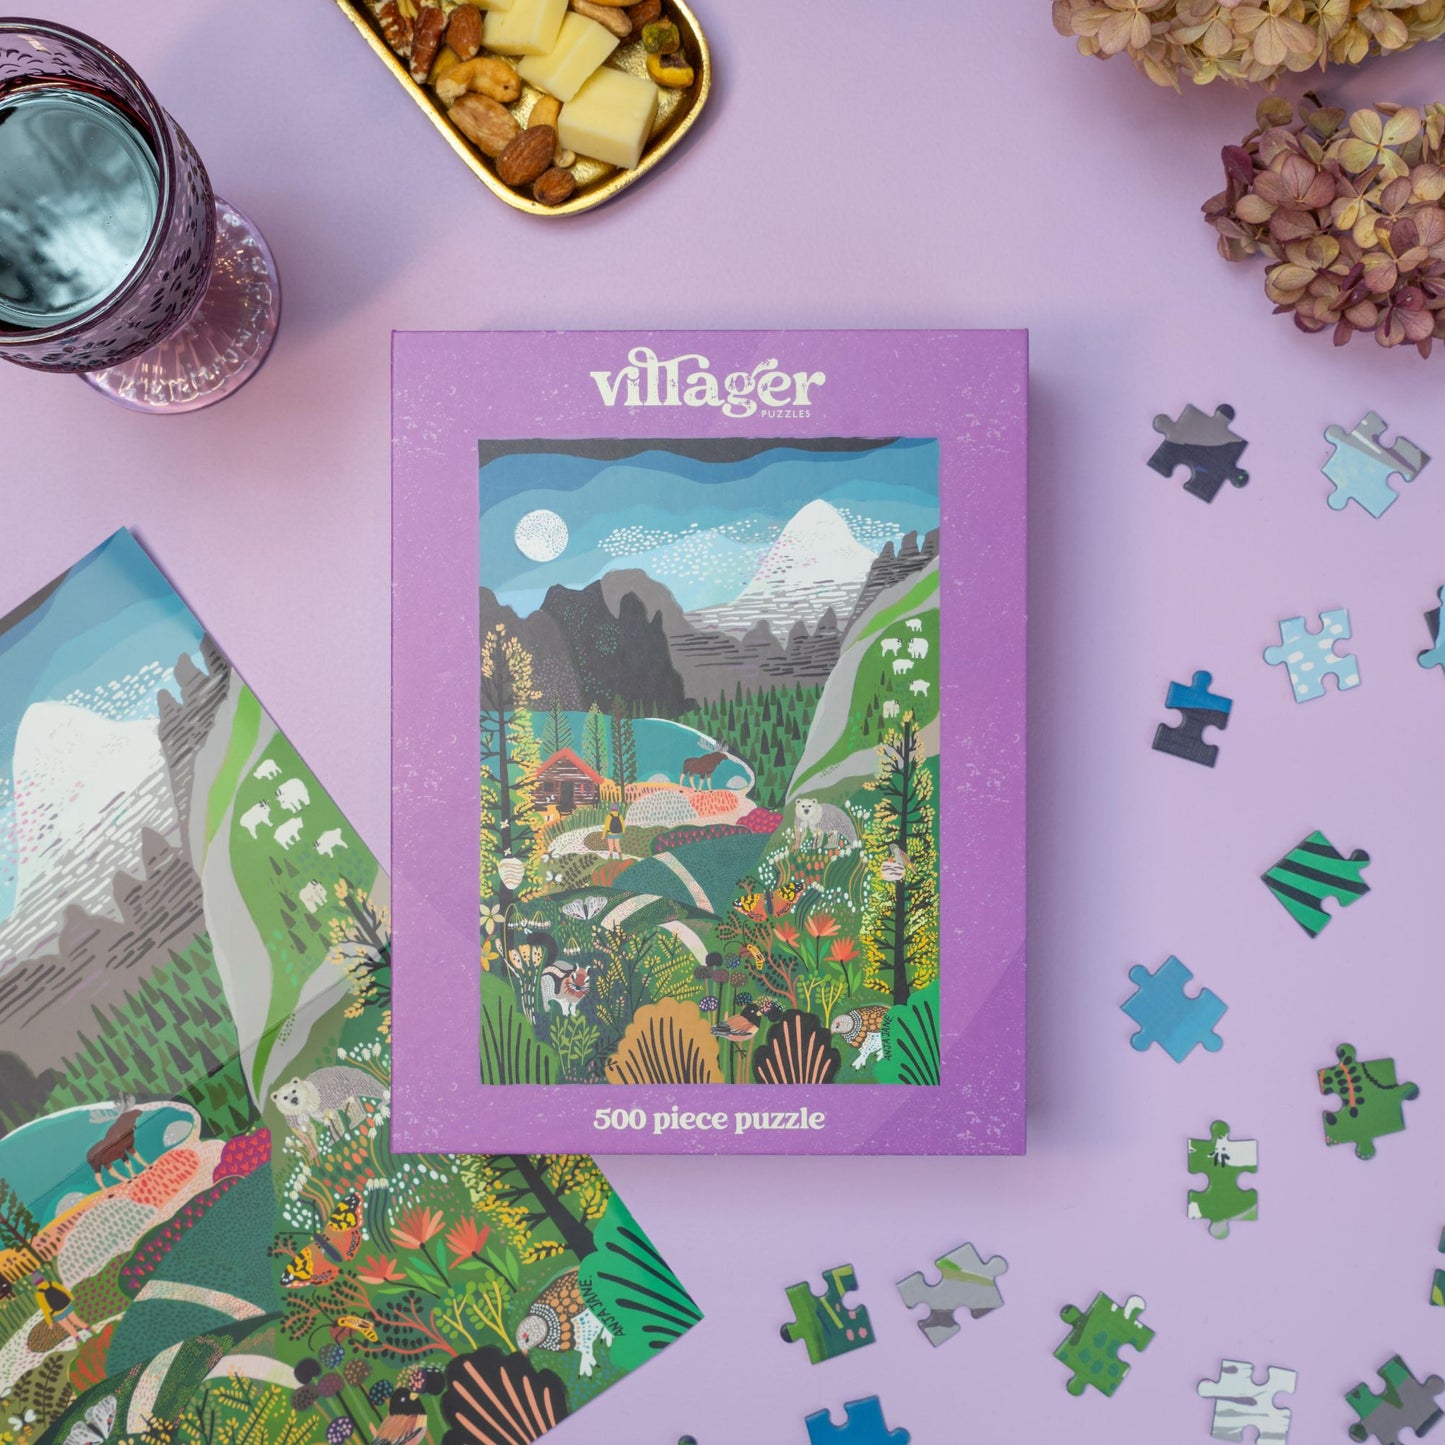 Puzzle photo of Villager Puzzle | 500-piece Rockies Explorer jigsaw puzzle designed by Anja Jane